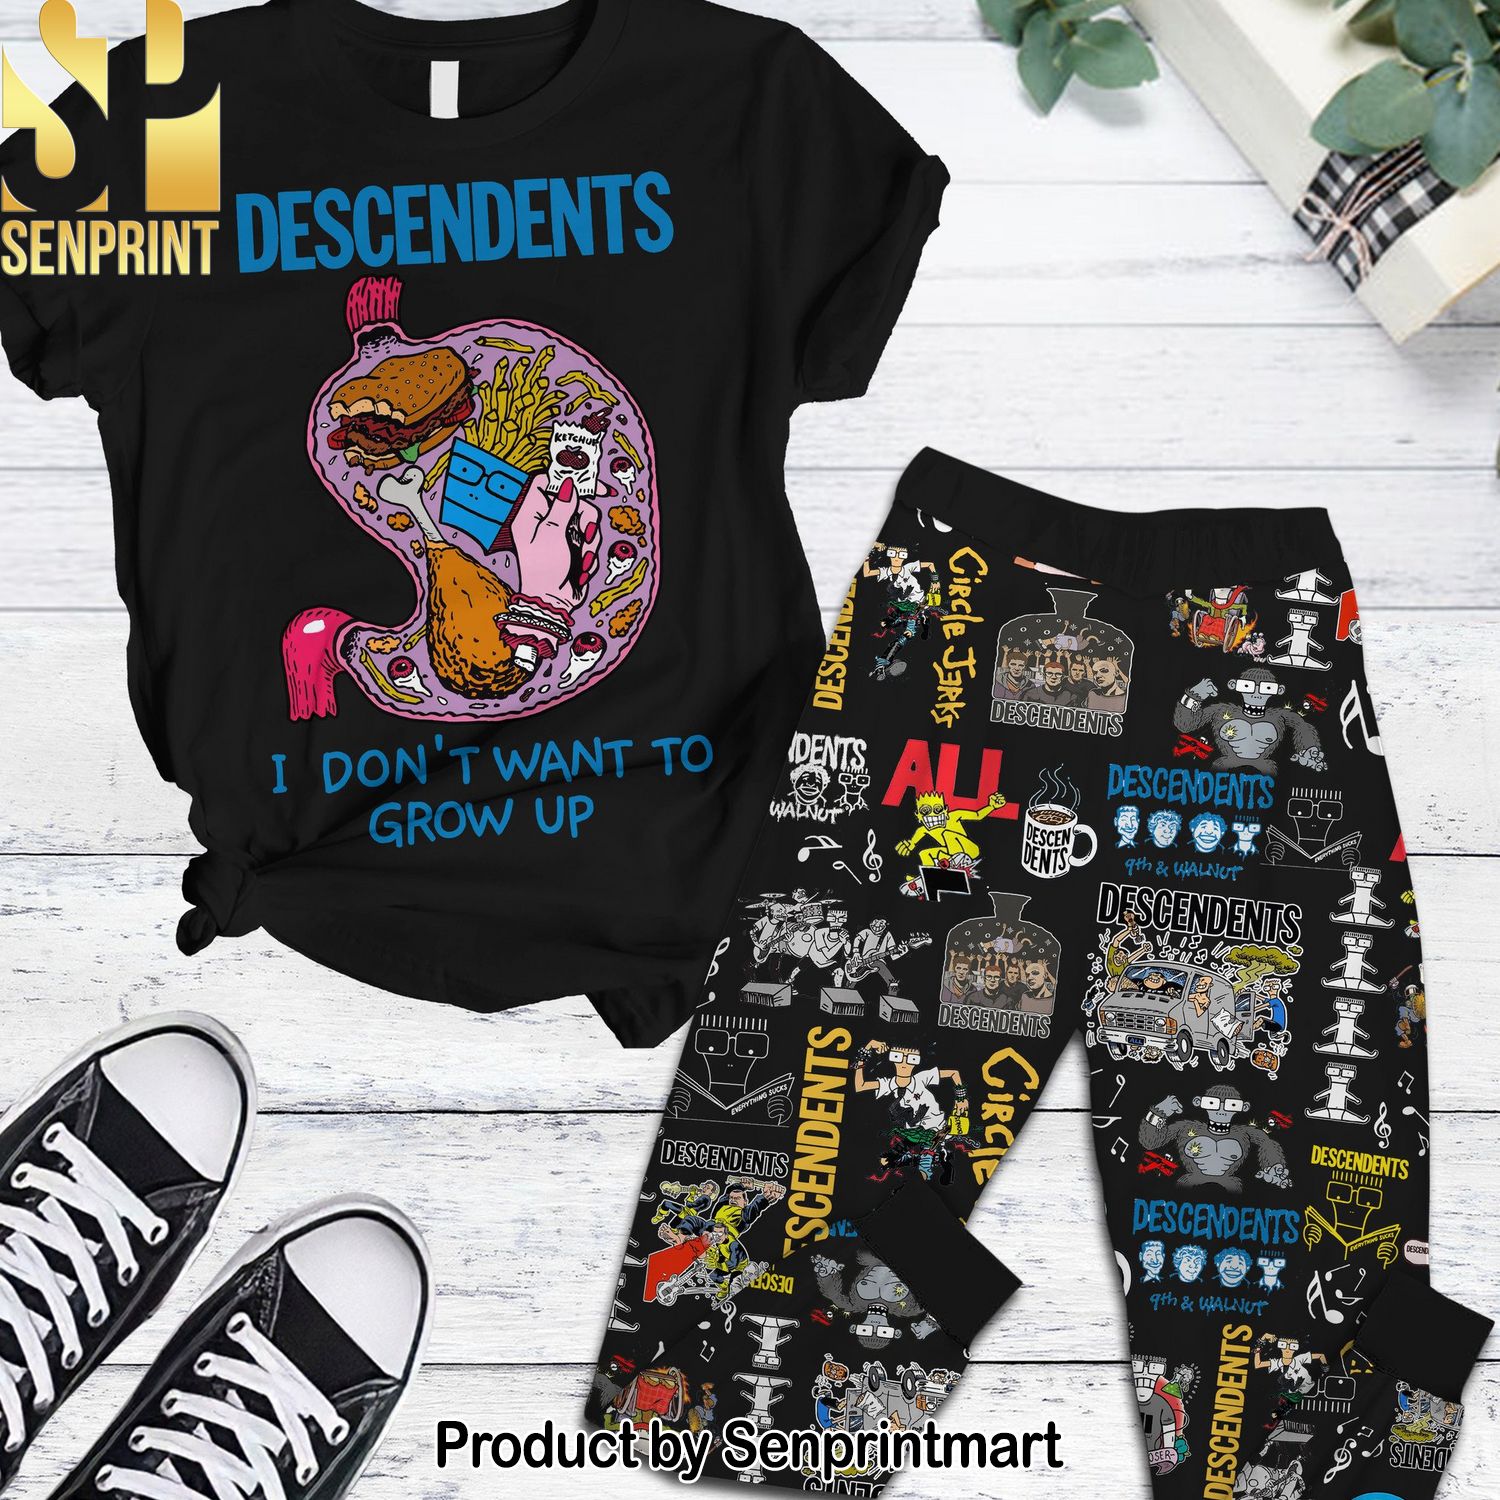 Descendents Rock Band Amazing Outfit Pajama Sets